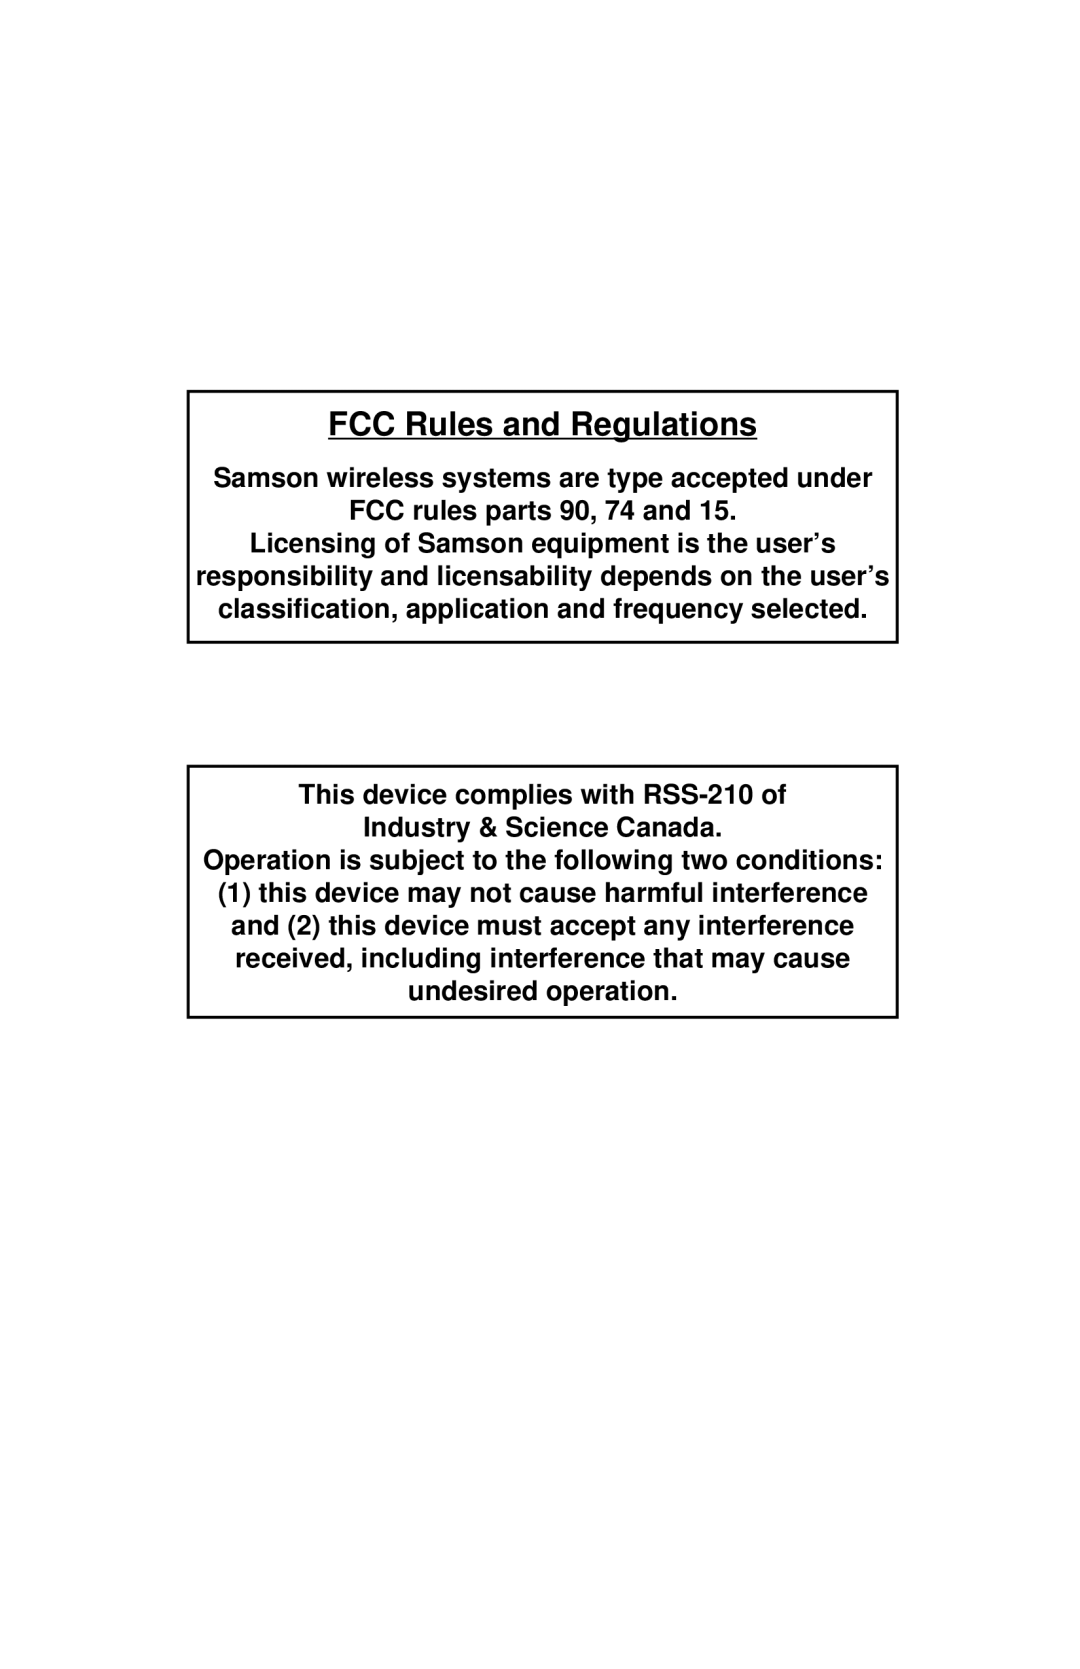 Samson UHF 801 owner manual FCC Rules and Regulations 